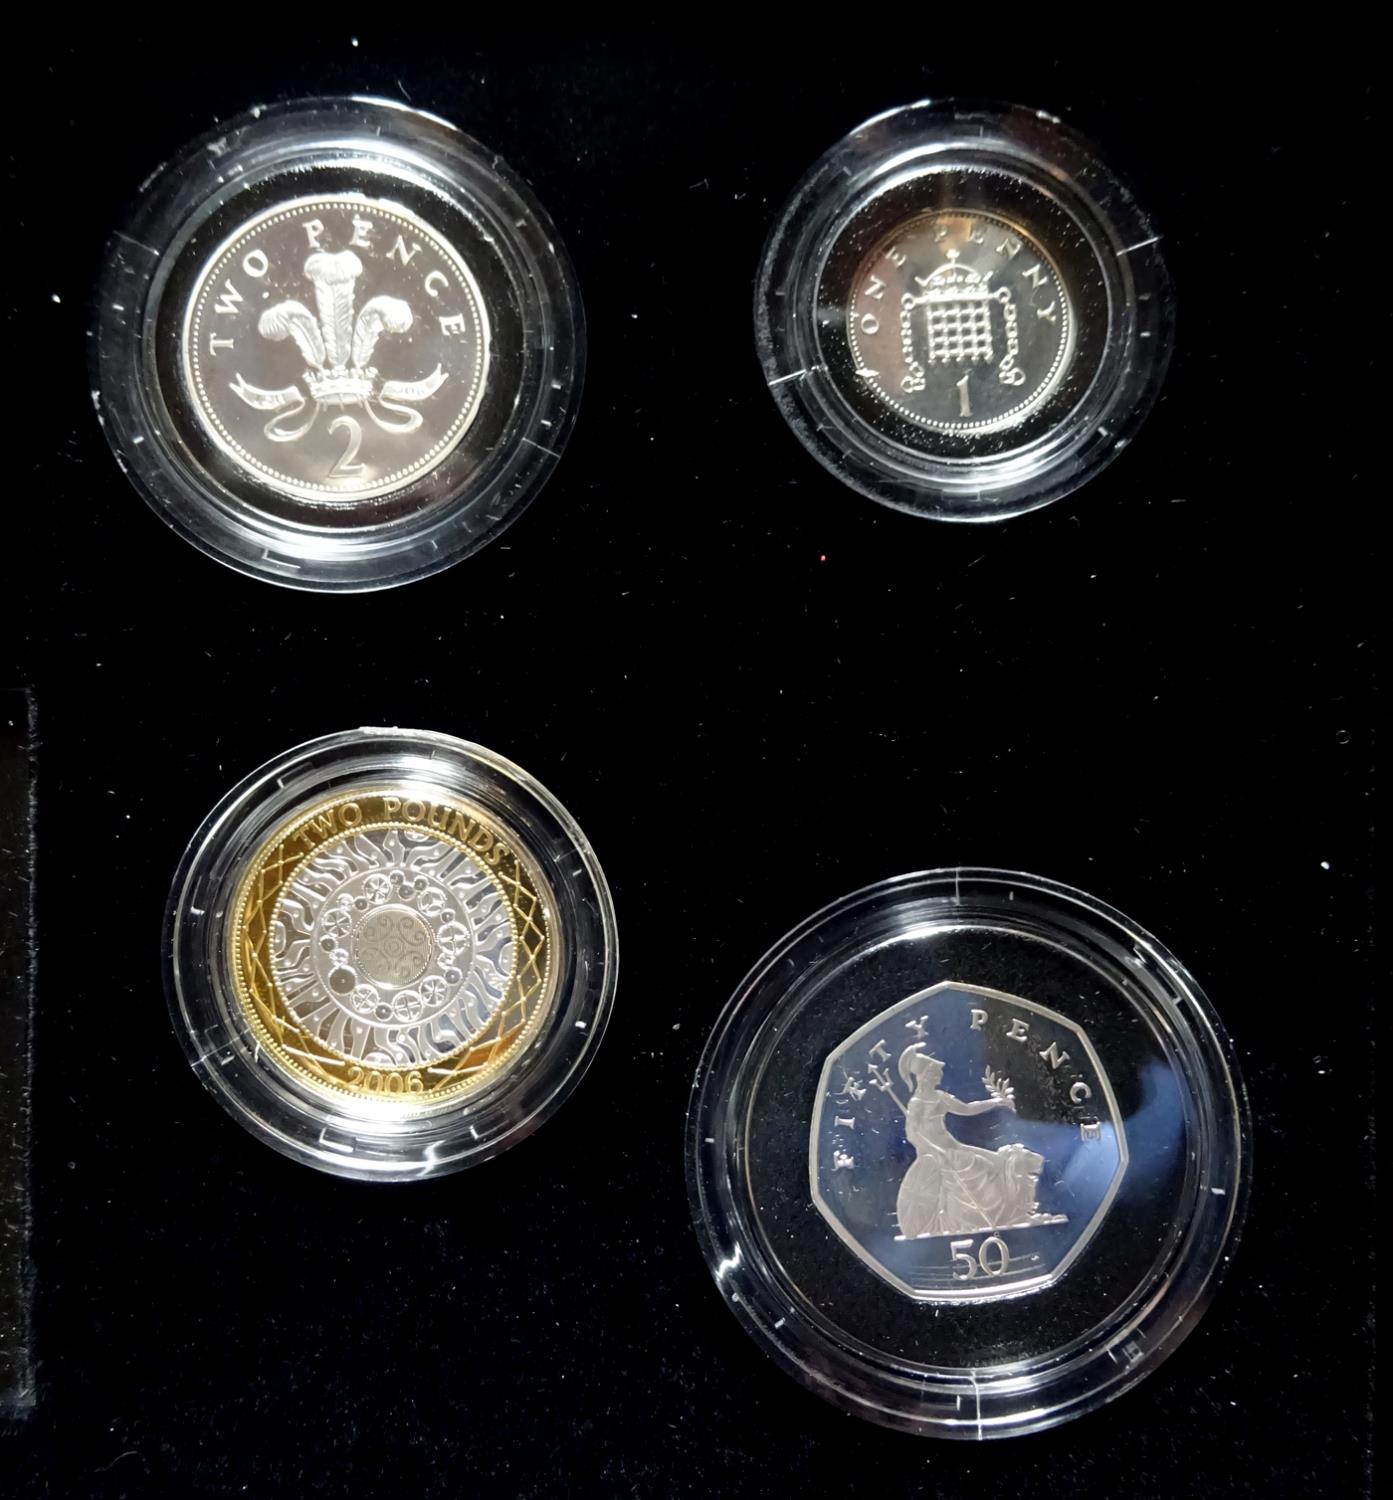 Elizabeth II 2006 set of coins "The Queen's 80th Birthday Collection - a celebration in silver" - Image 6 of 6